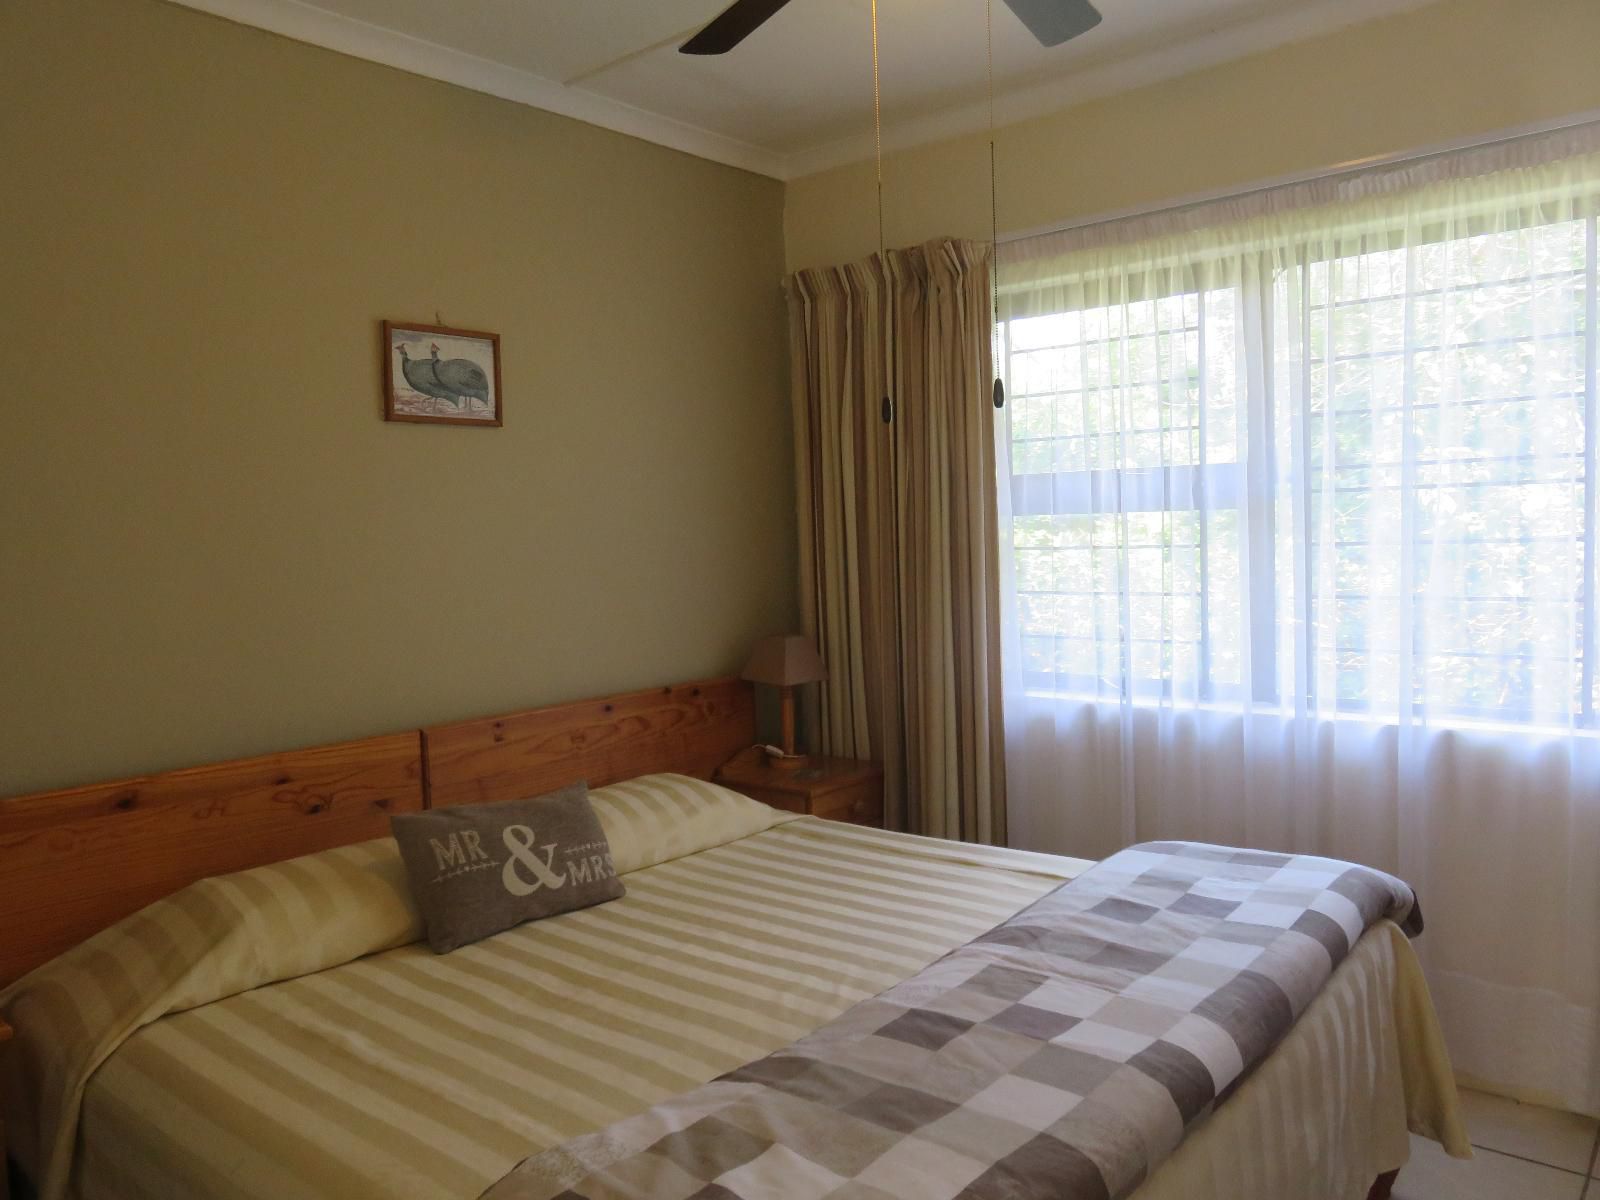 40 Winks Accommodation Somerset West Western Cape South Africa Bedroom